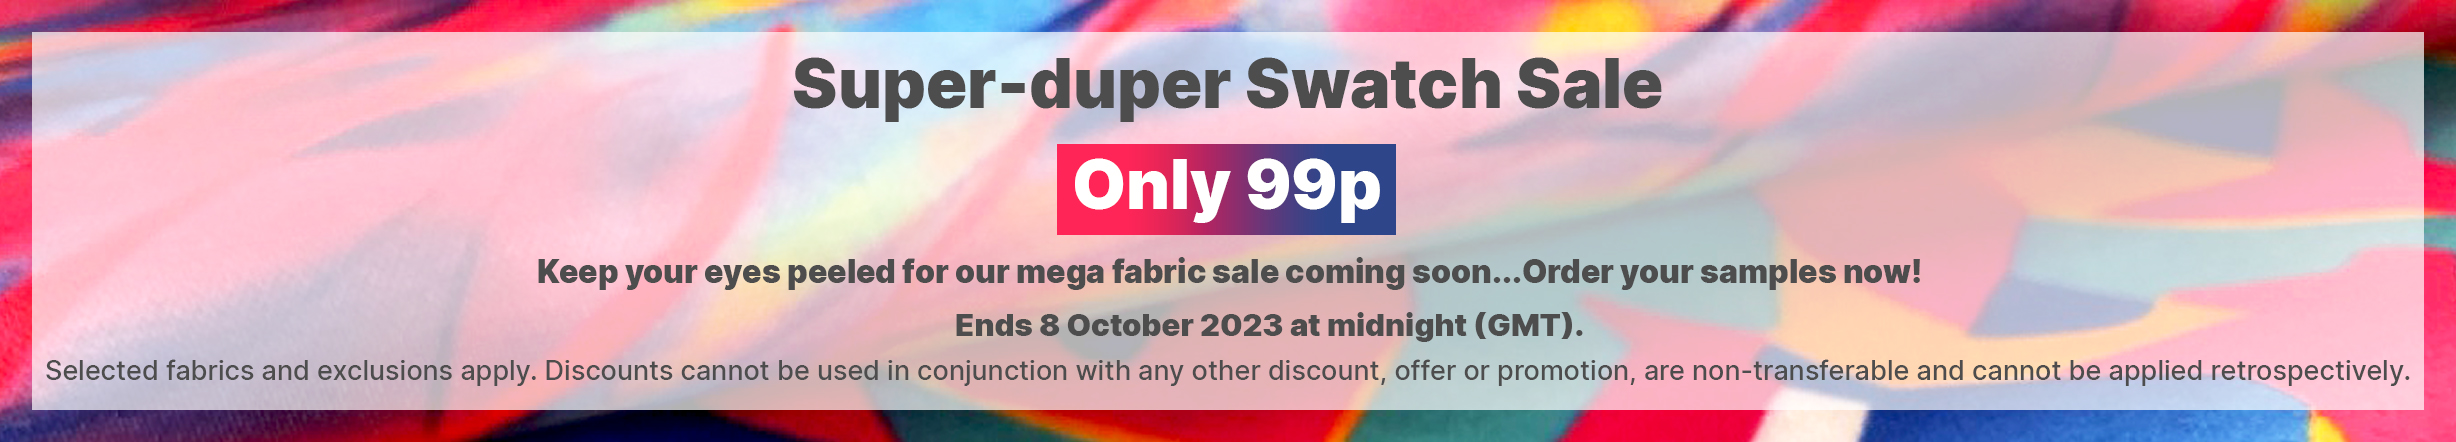 Super-duper Swatch Sale! 20% Only 99p!. Ends 8 October 2023 at midnight (GMT). Selected fabrics and exclusions apply. Discounts cannot be used in conjunction with any other discount, offer or promotion, are non-transferable and cannot be applied retrospectively. 